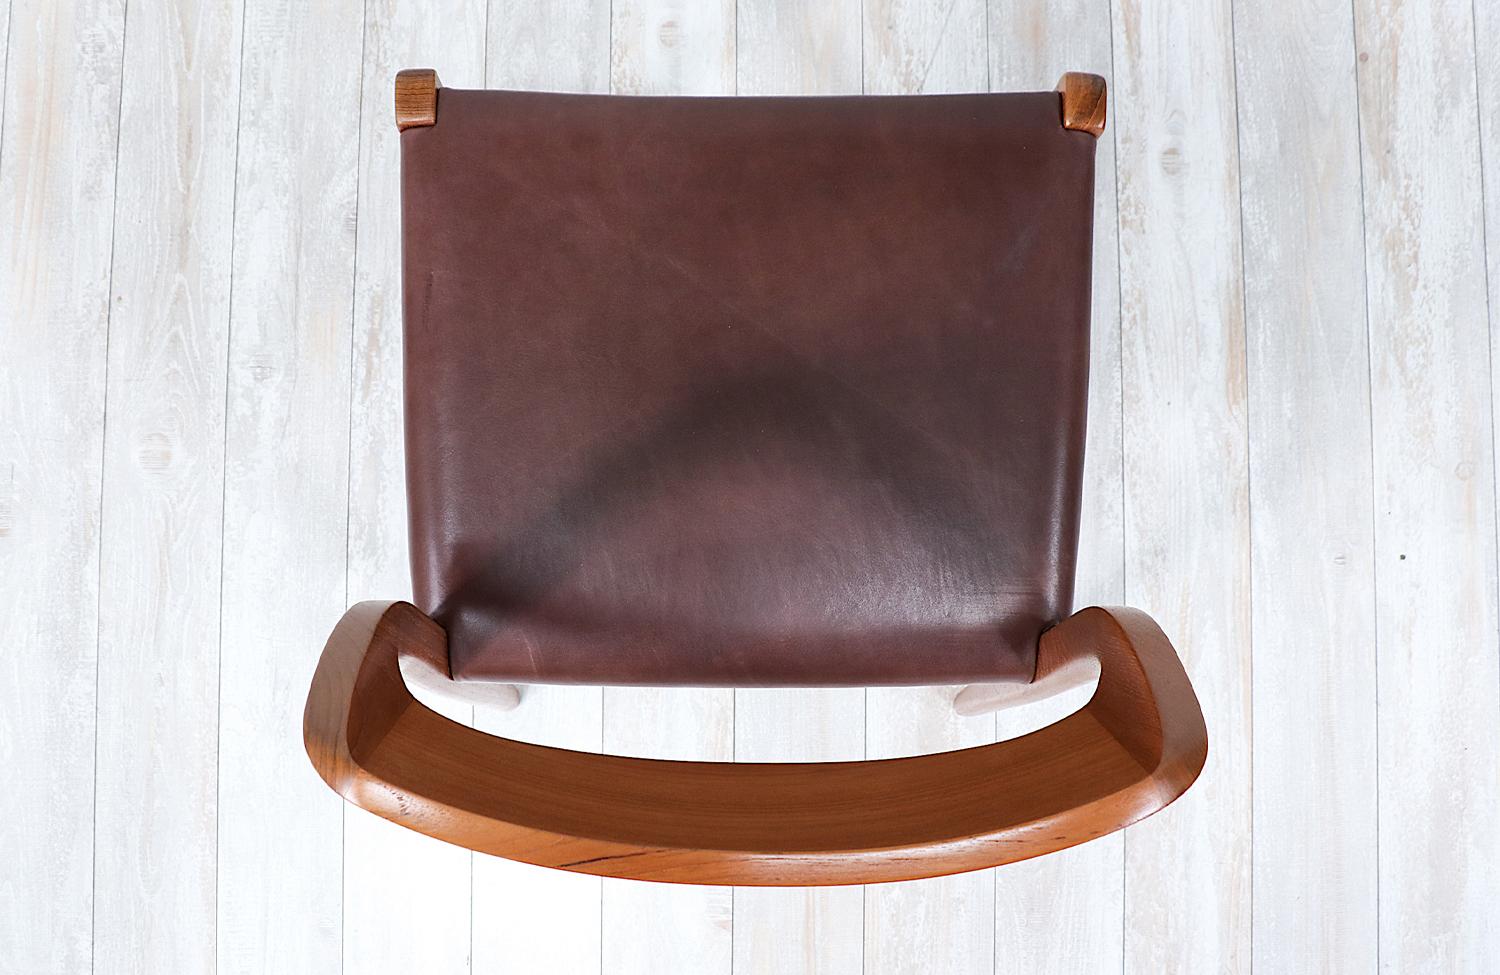 Arne Hovmand-Olsen Model 71 Teak Wood & Leather Dining Chairs for J.L. Møllers In Excellent Condition For Sale In Los Angeles, CA